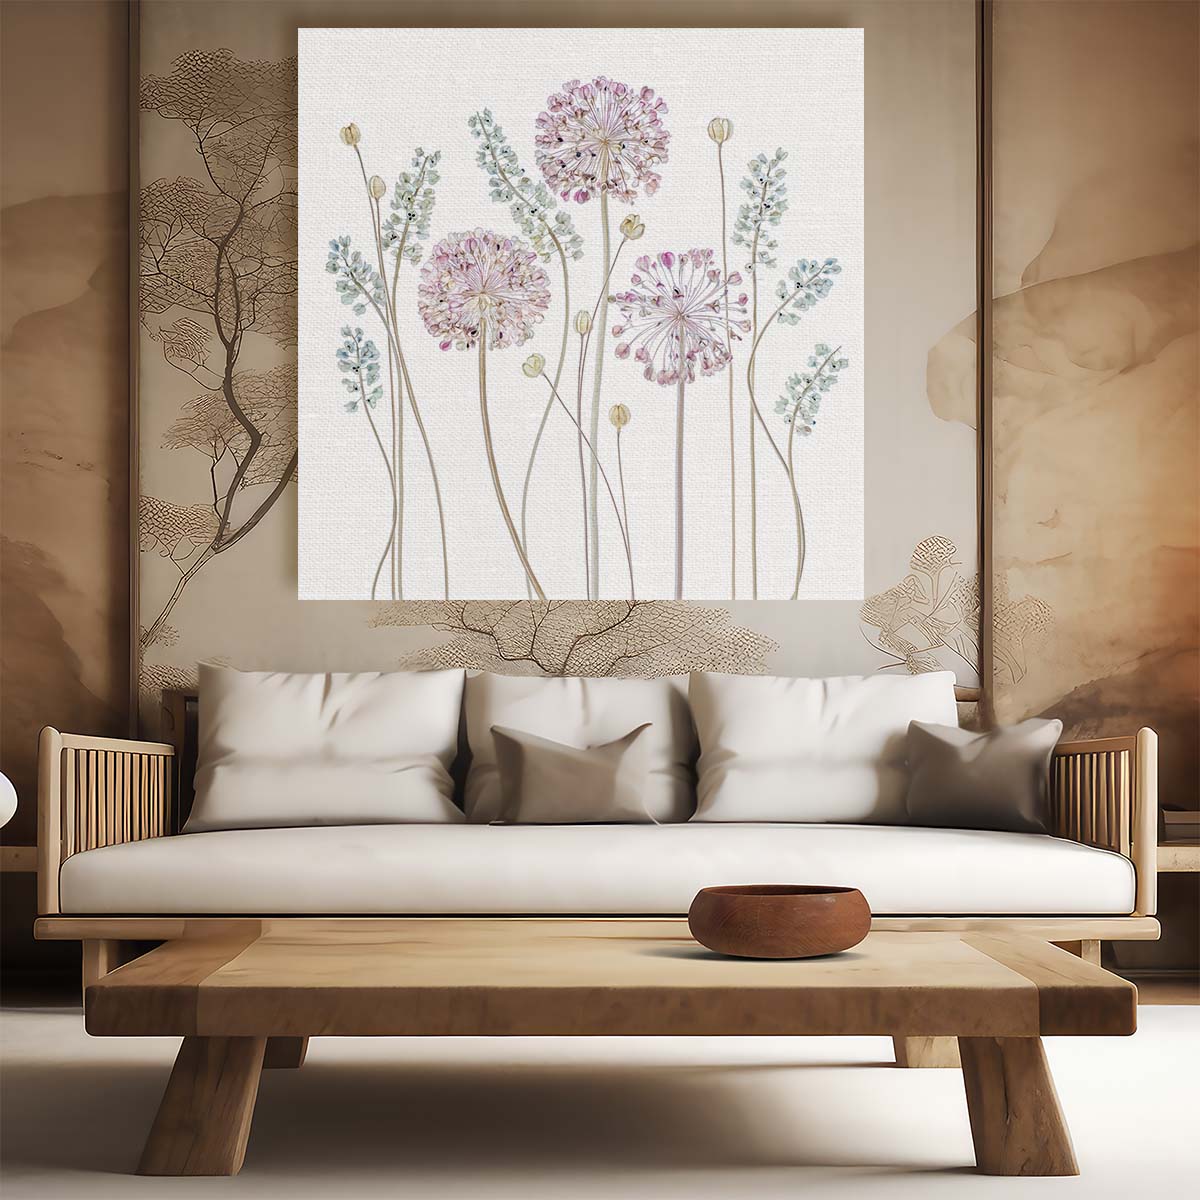 Allium & Muscari Floral Photography Wall Art by Luxuriance Designs. Made in USA.